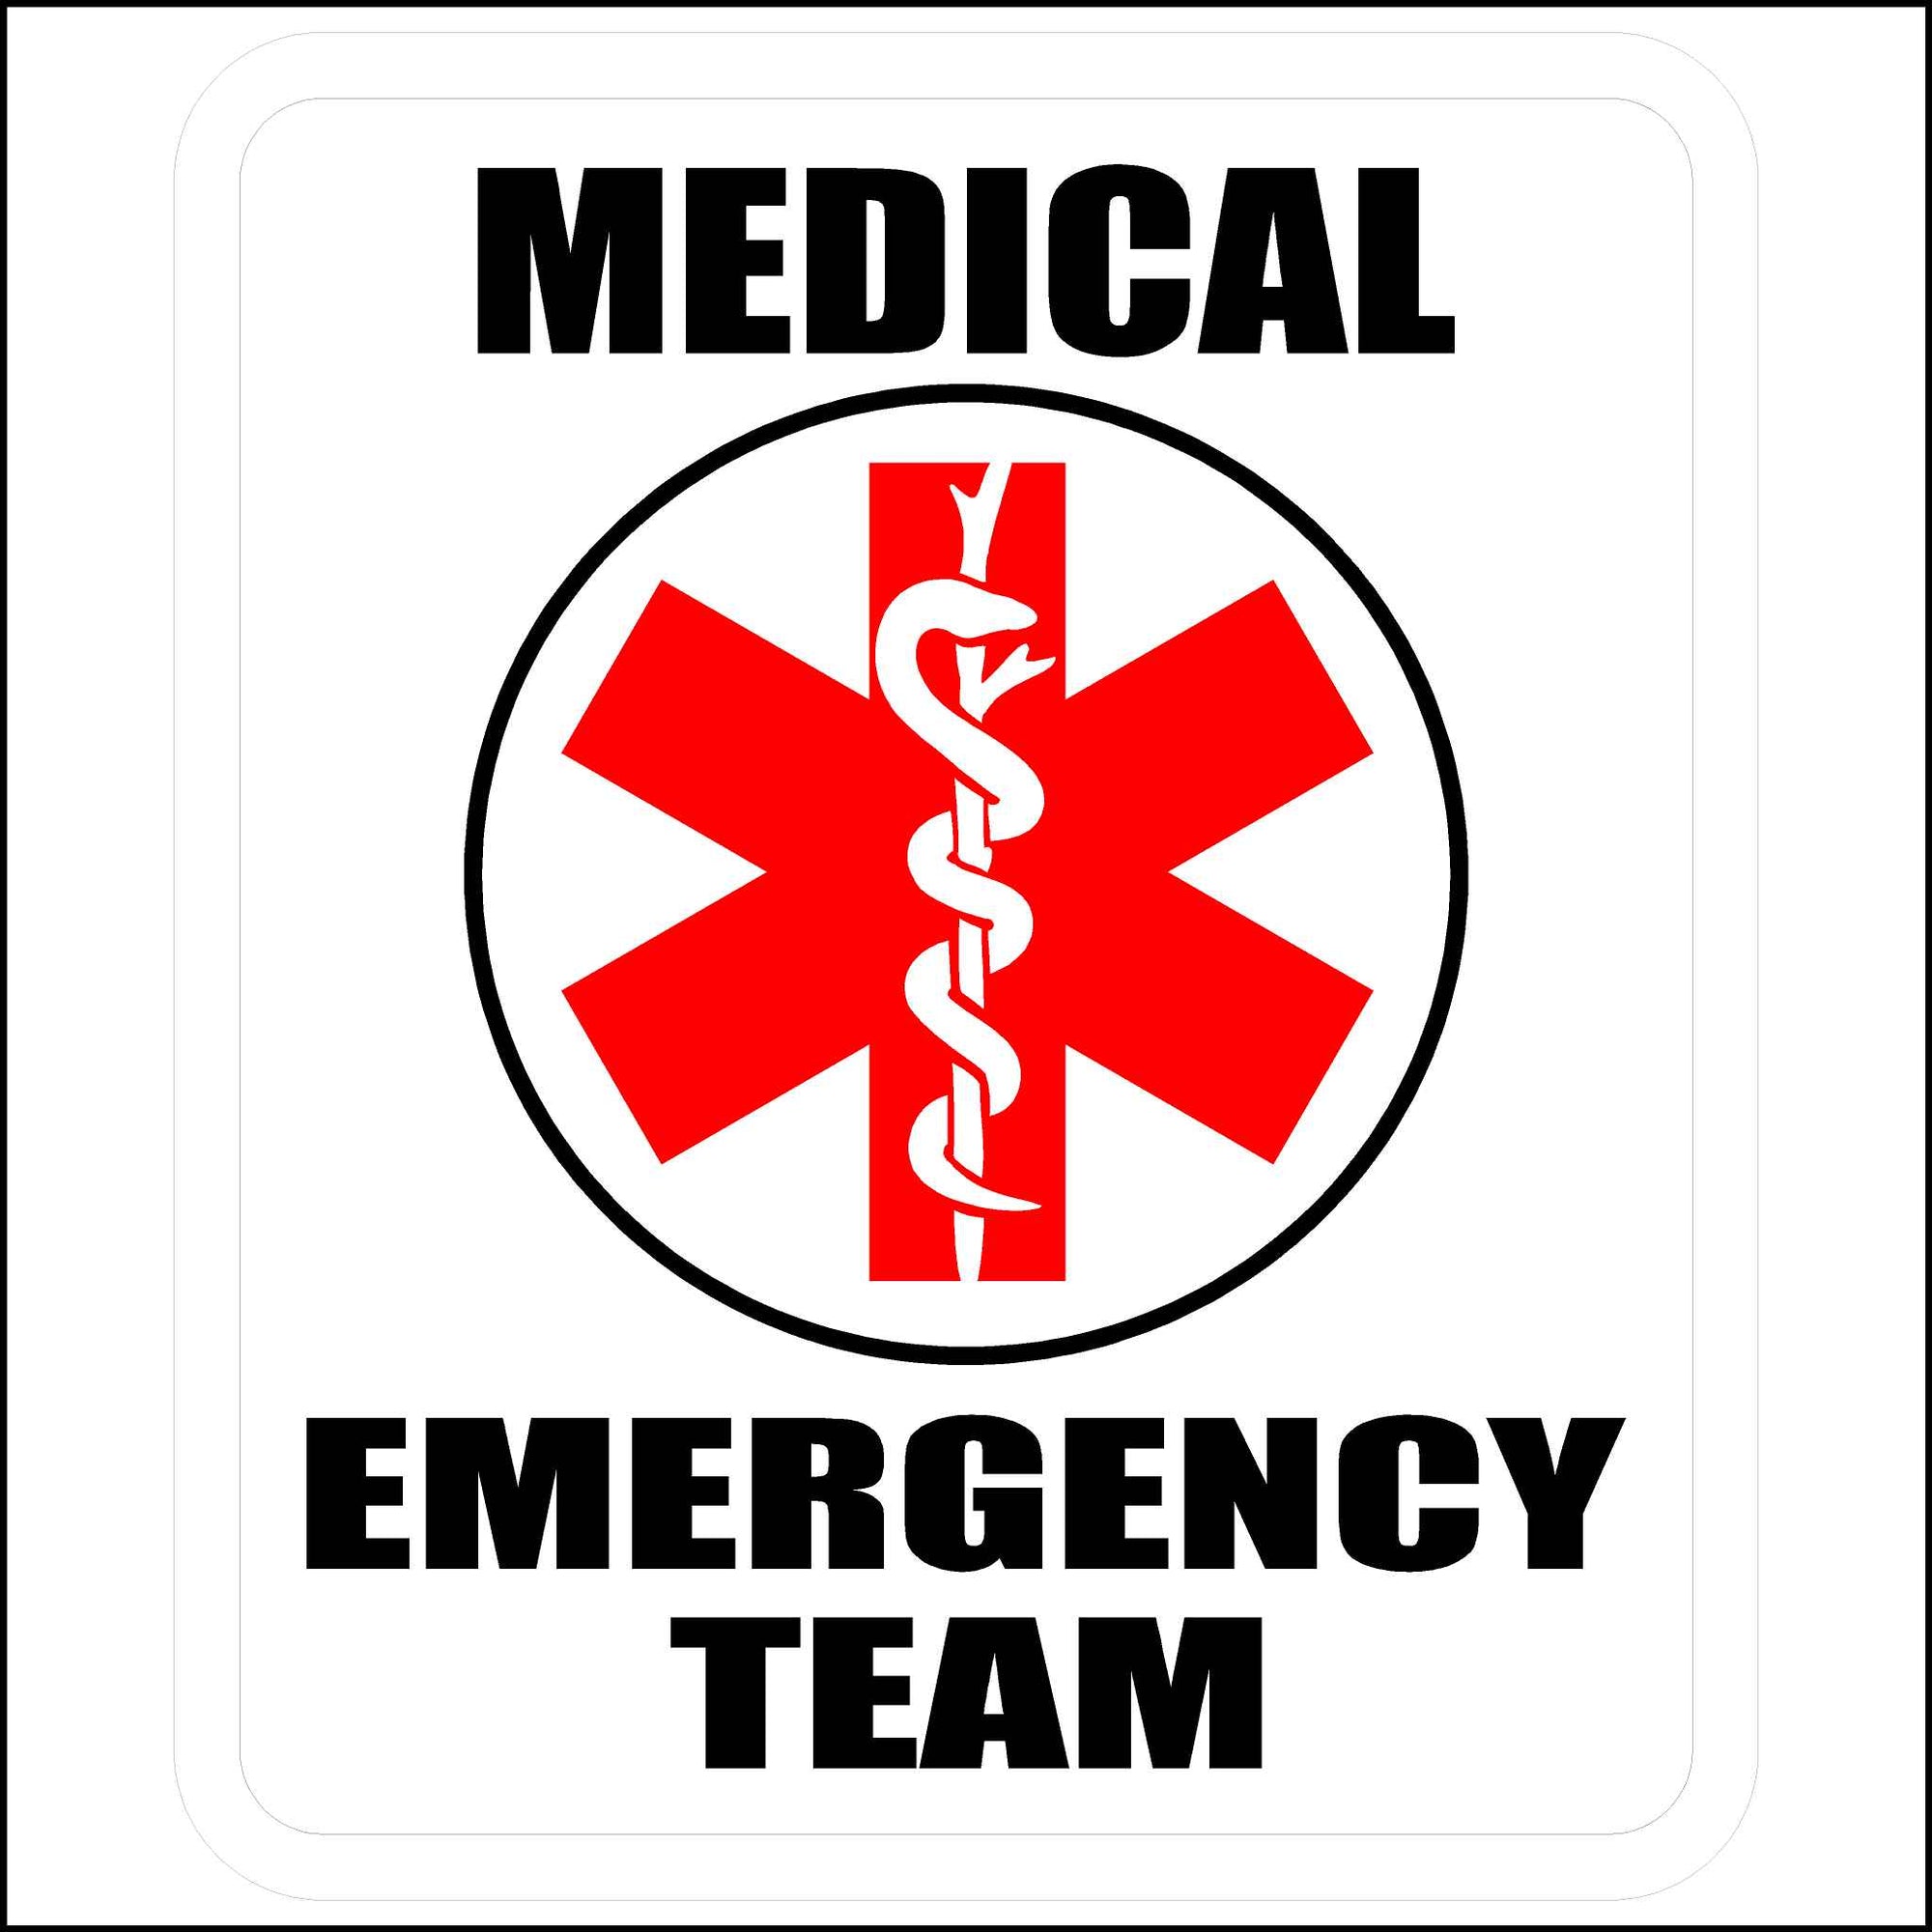 Red, White, and Black In Color Medical Emergency Team Decal.